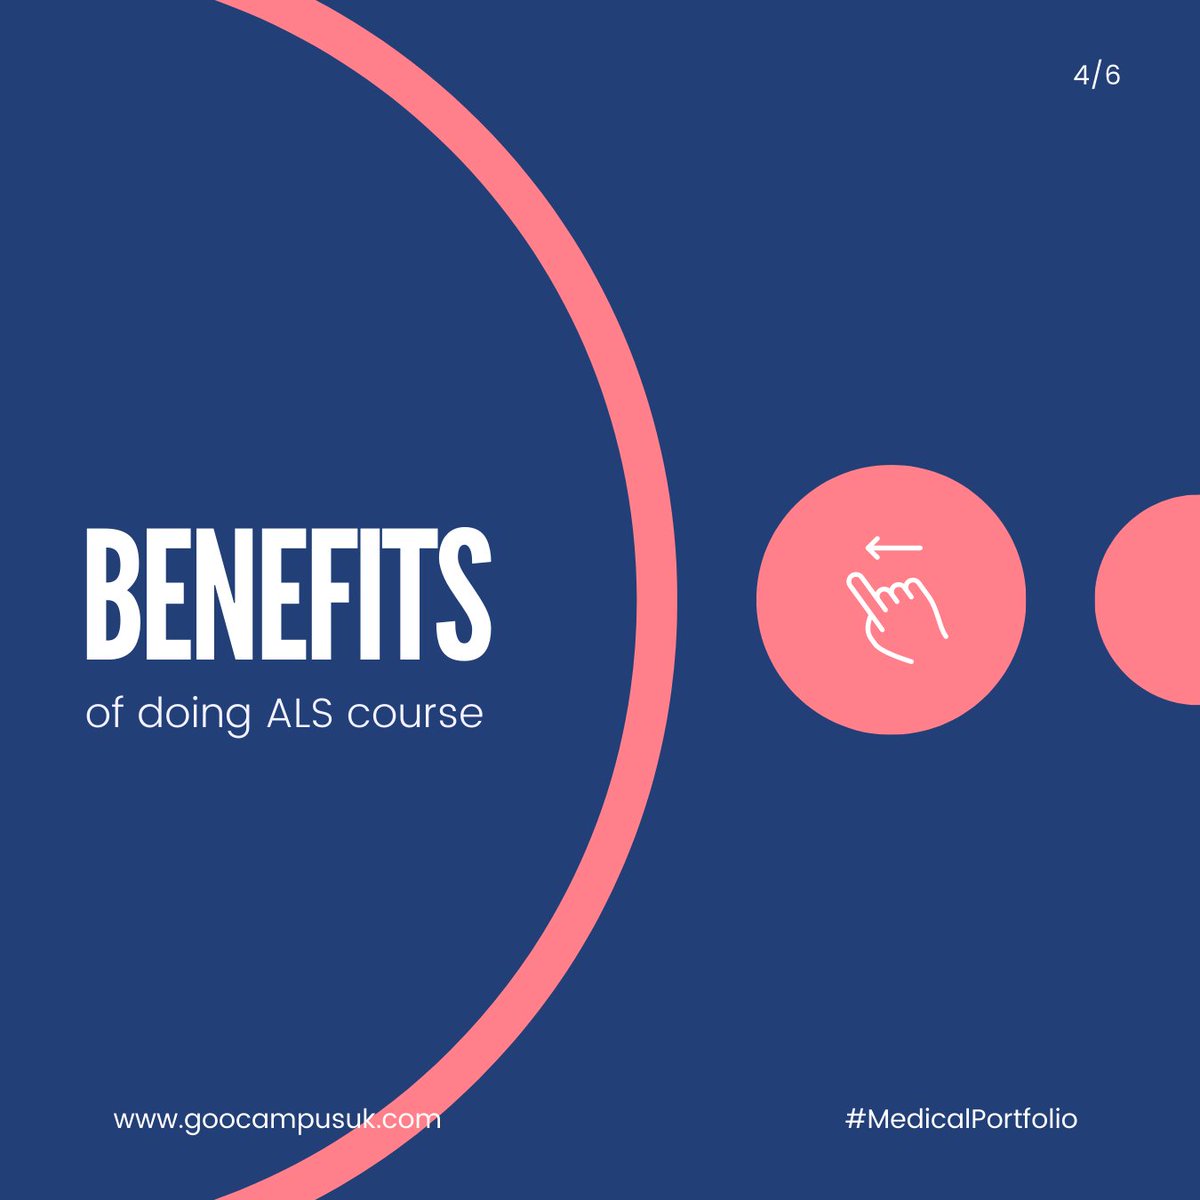 Swipe to read what is ALS course and how will it benefit you in your medical portfolio.
For more such posts follow us!
.
.
#goocampus #uk #medical #doctors #medicalportfolio #portfolio #doctorsportfolio